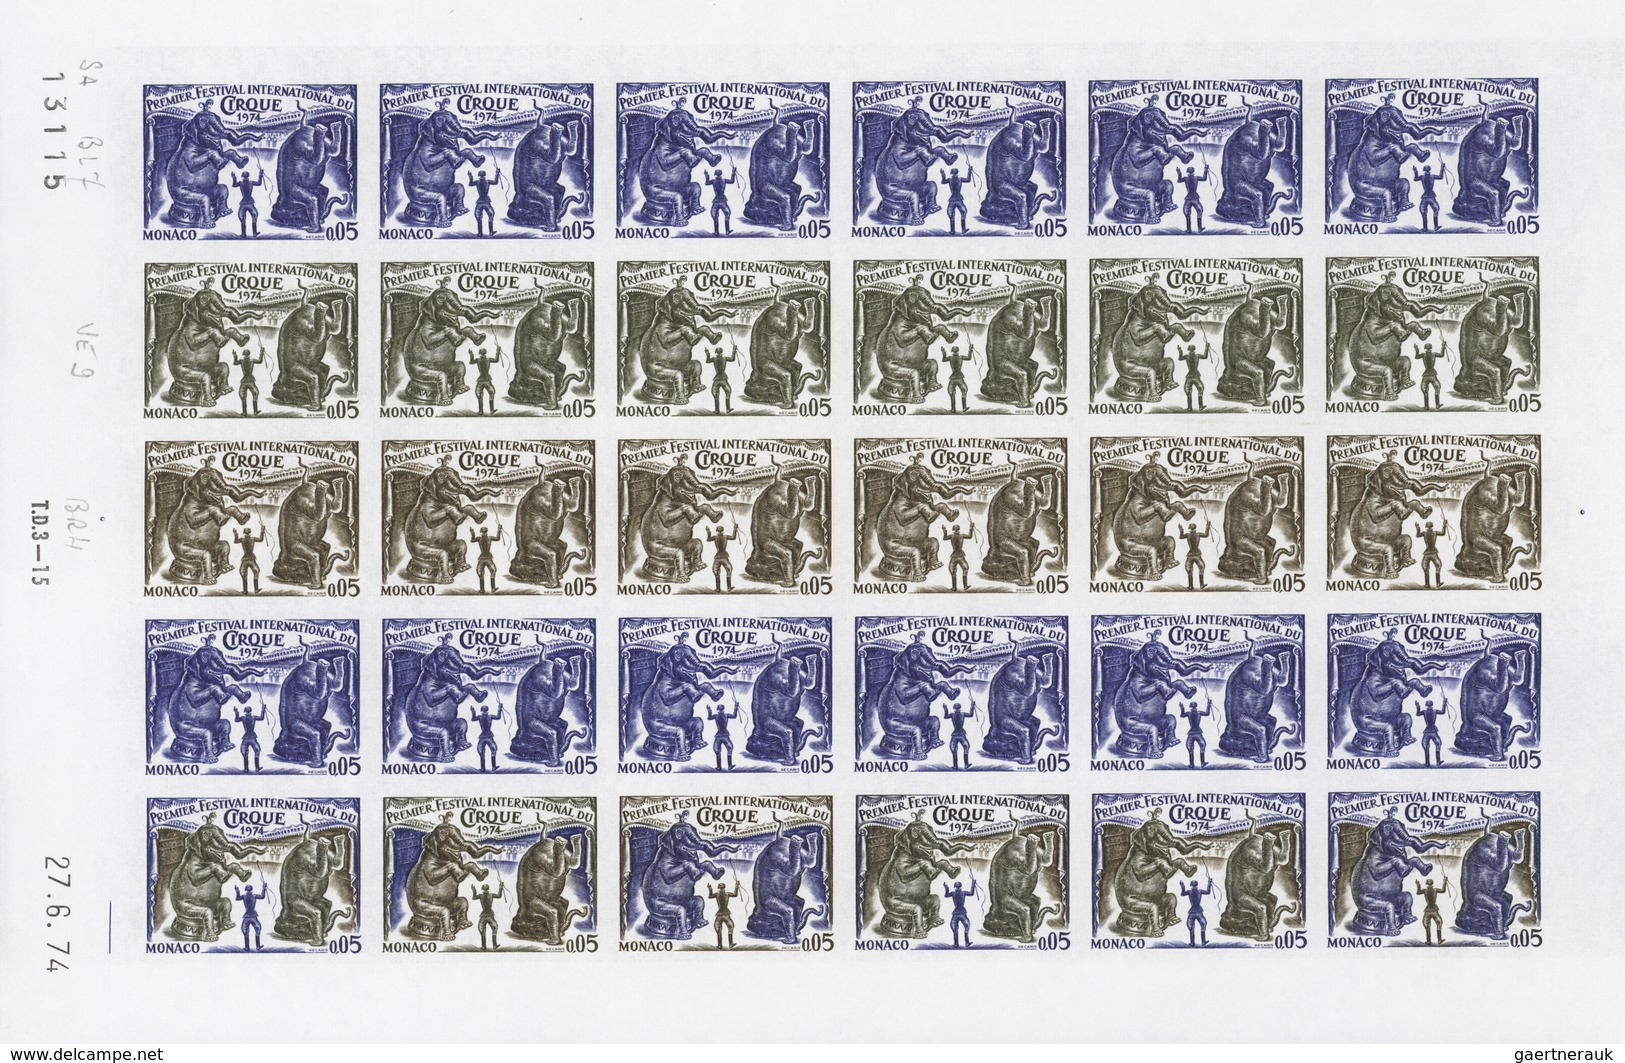 Monaco: 1973/1977, IMPERFORATE COLOUR PROOFS, MNH collection of 38 complete sheets (=1.040 proofs),